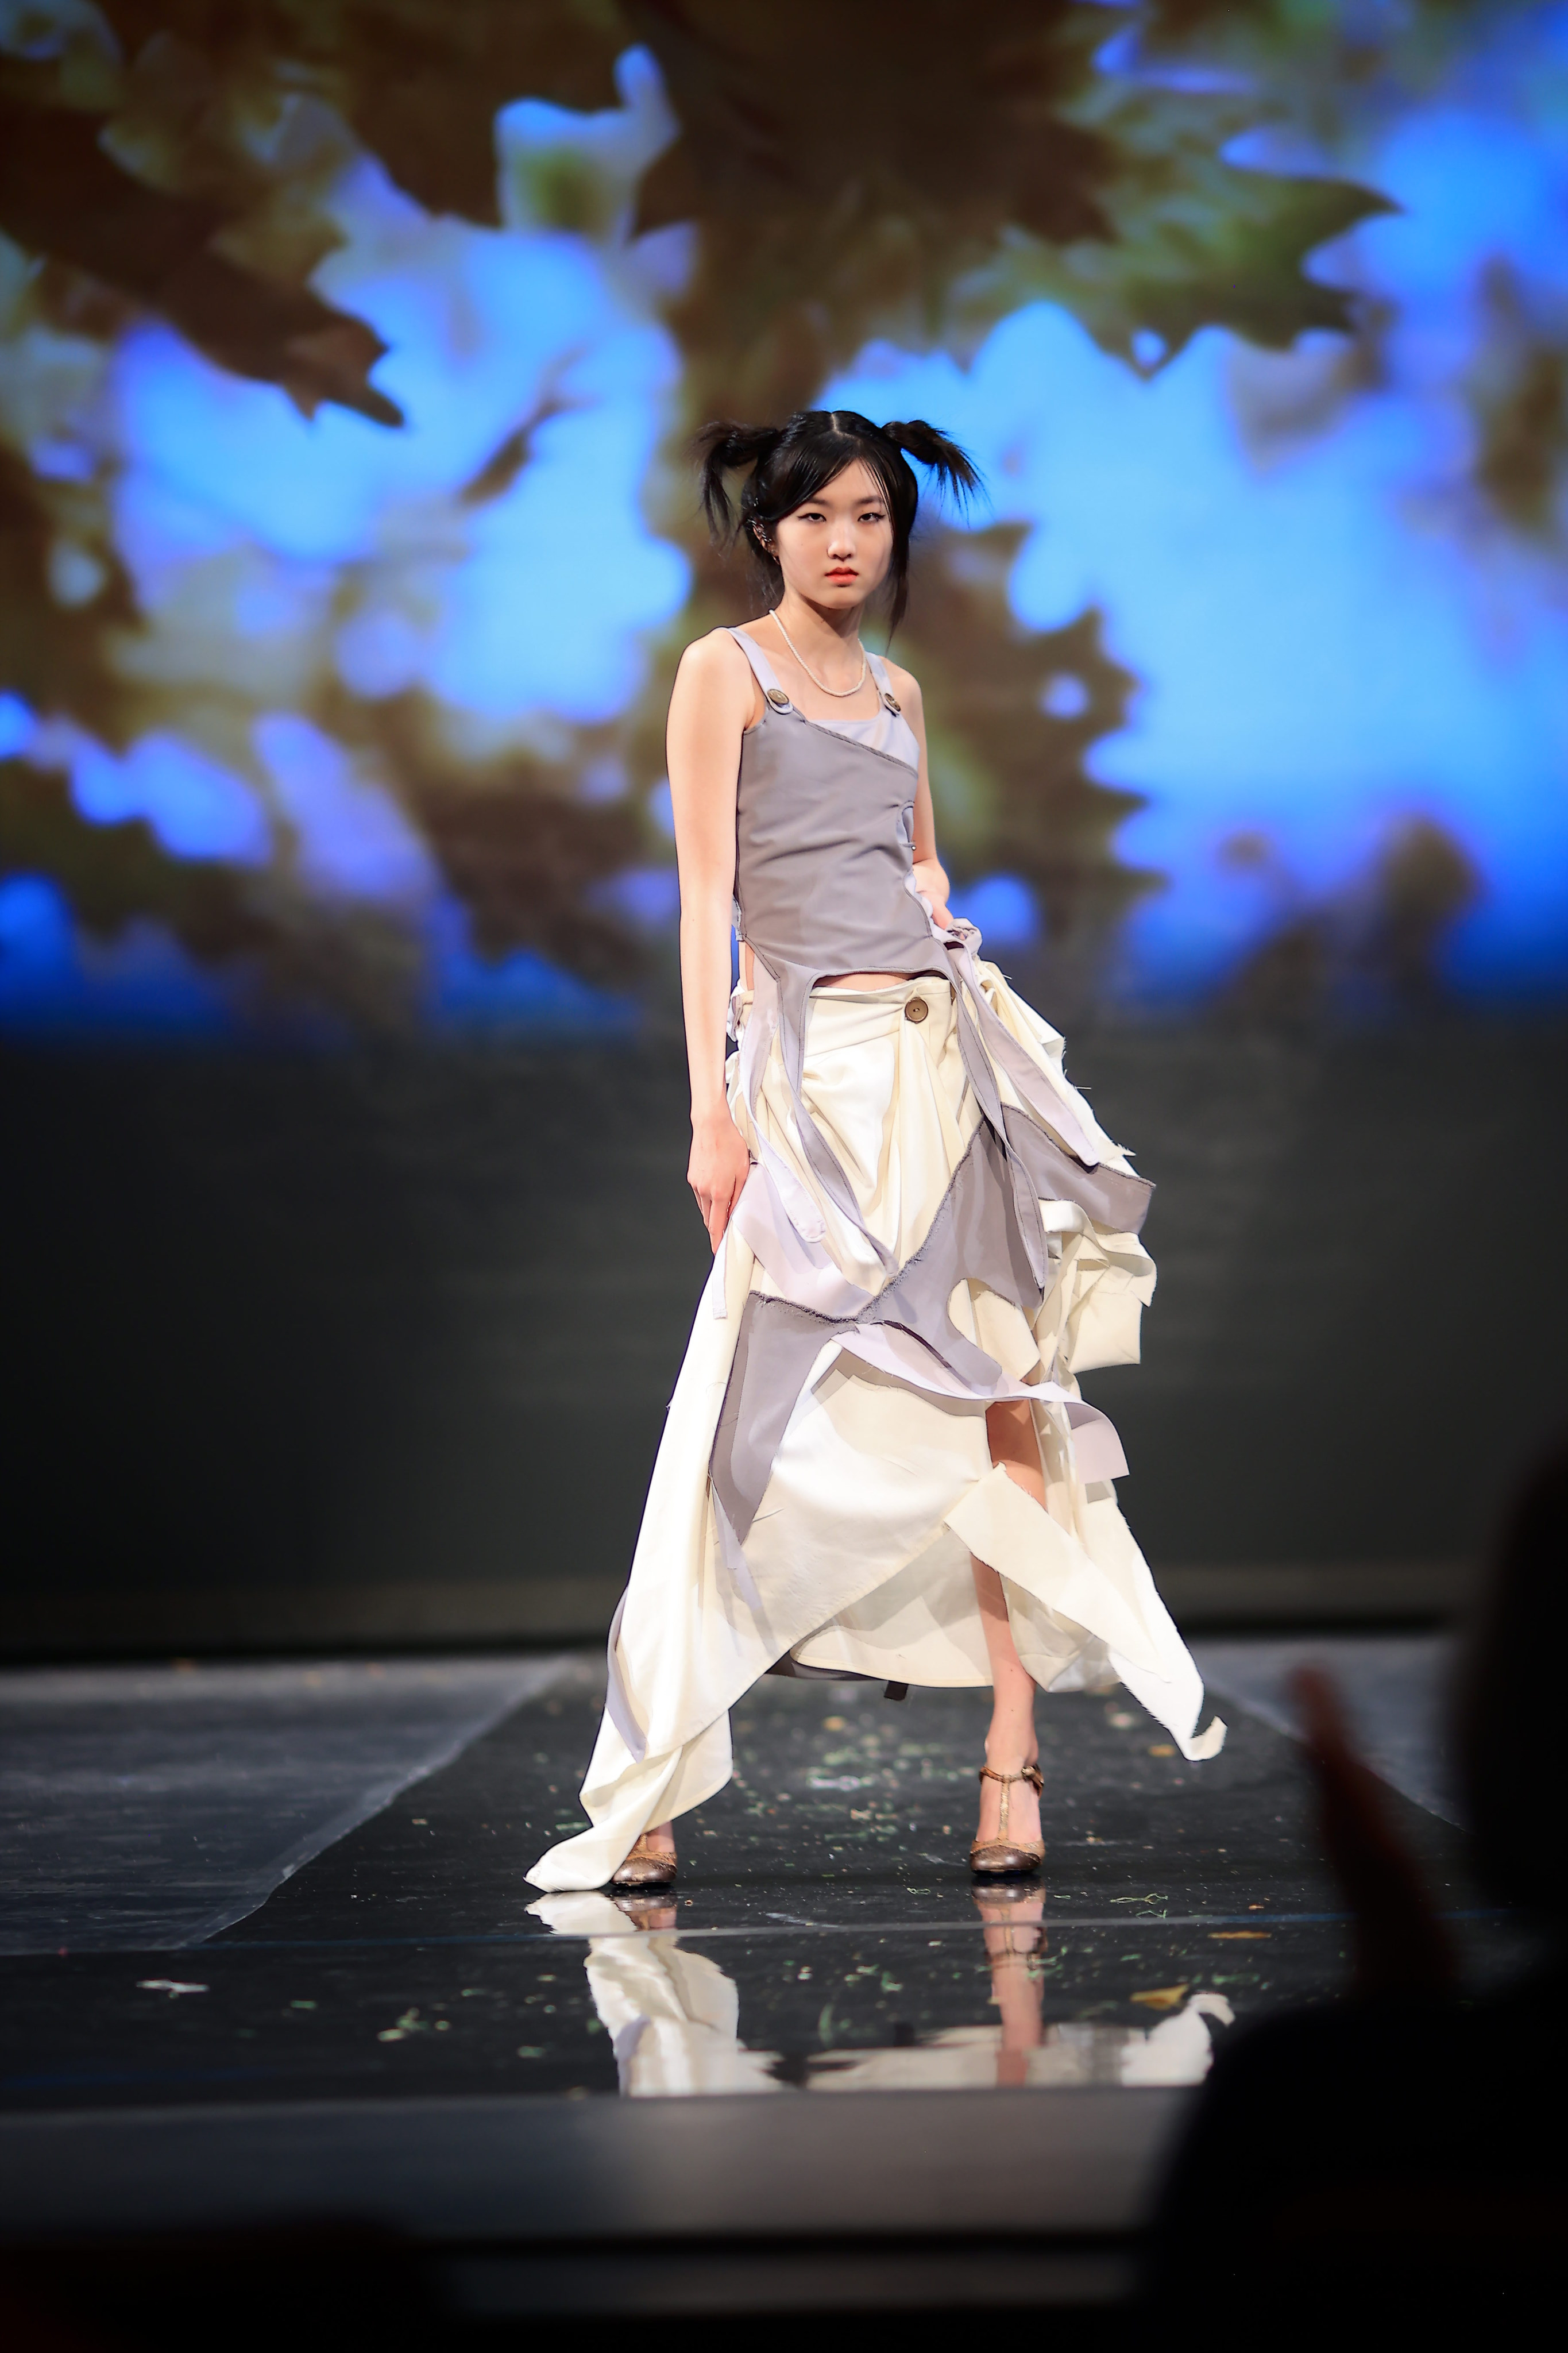 A model posing on  the runway wearing a light gray and white two-piece sleeveless dress.